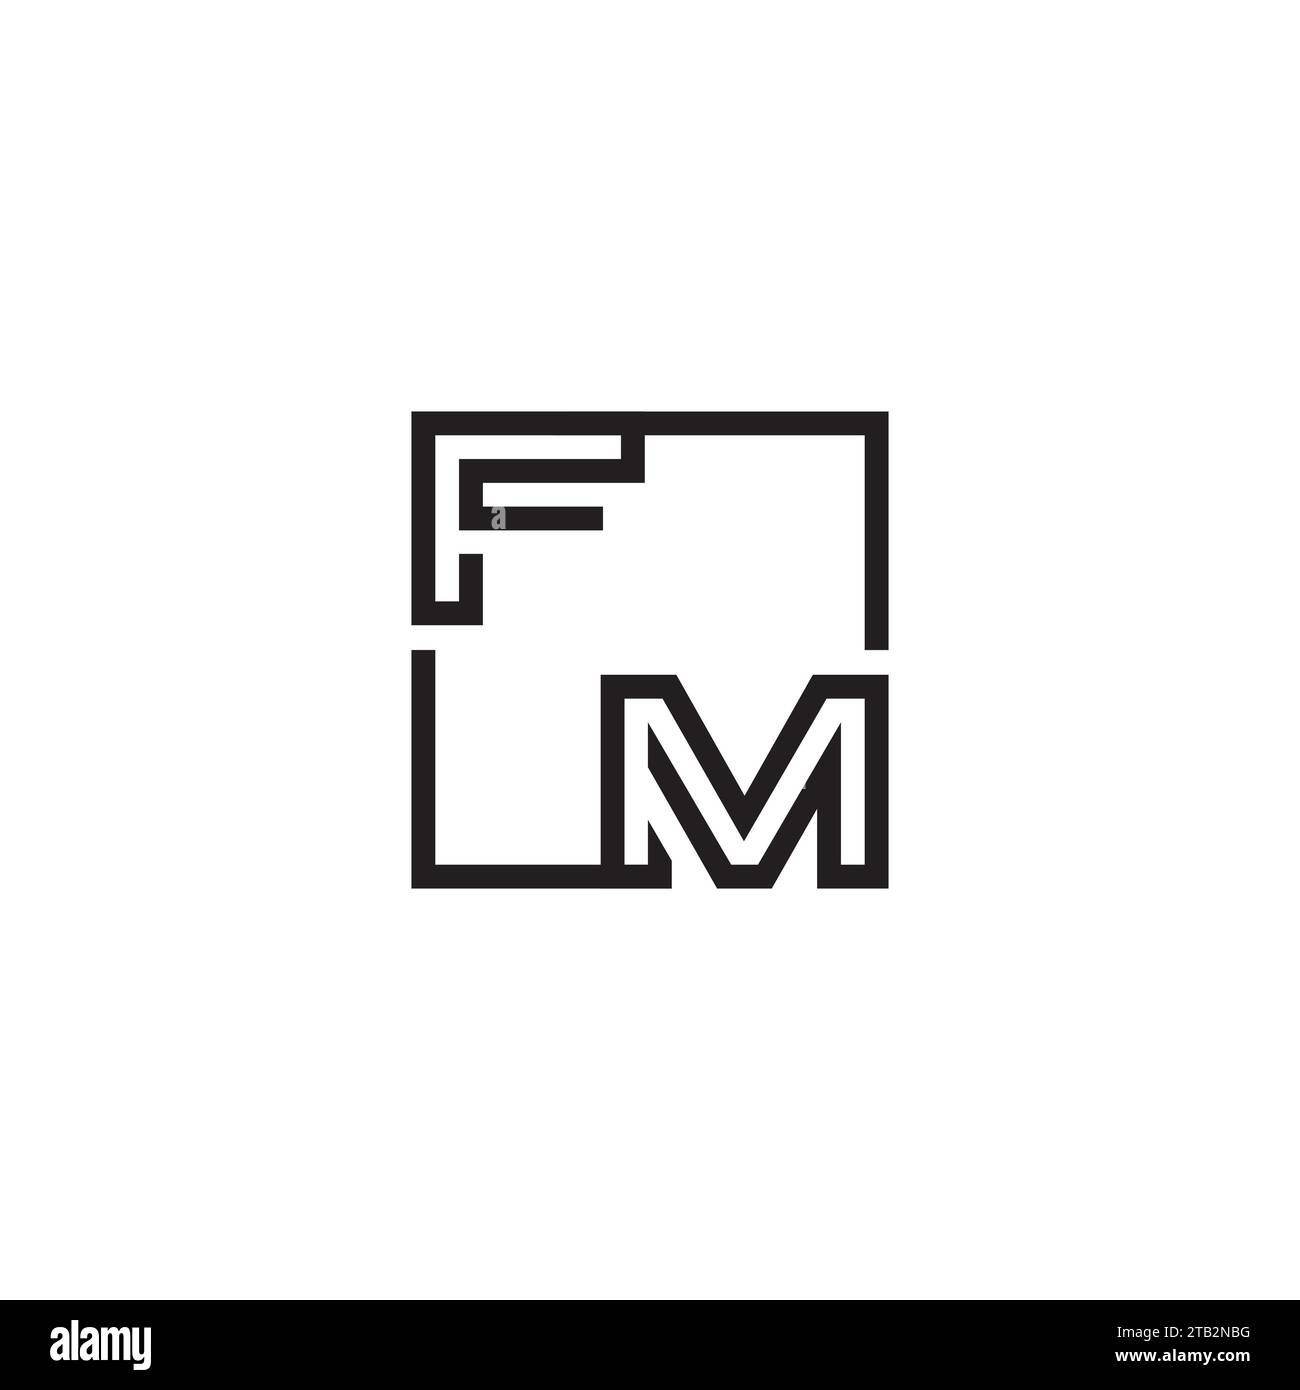 FM initial logo letters in high quality professional design that will print well across any print media Stock Vector